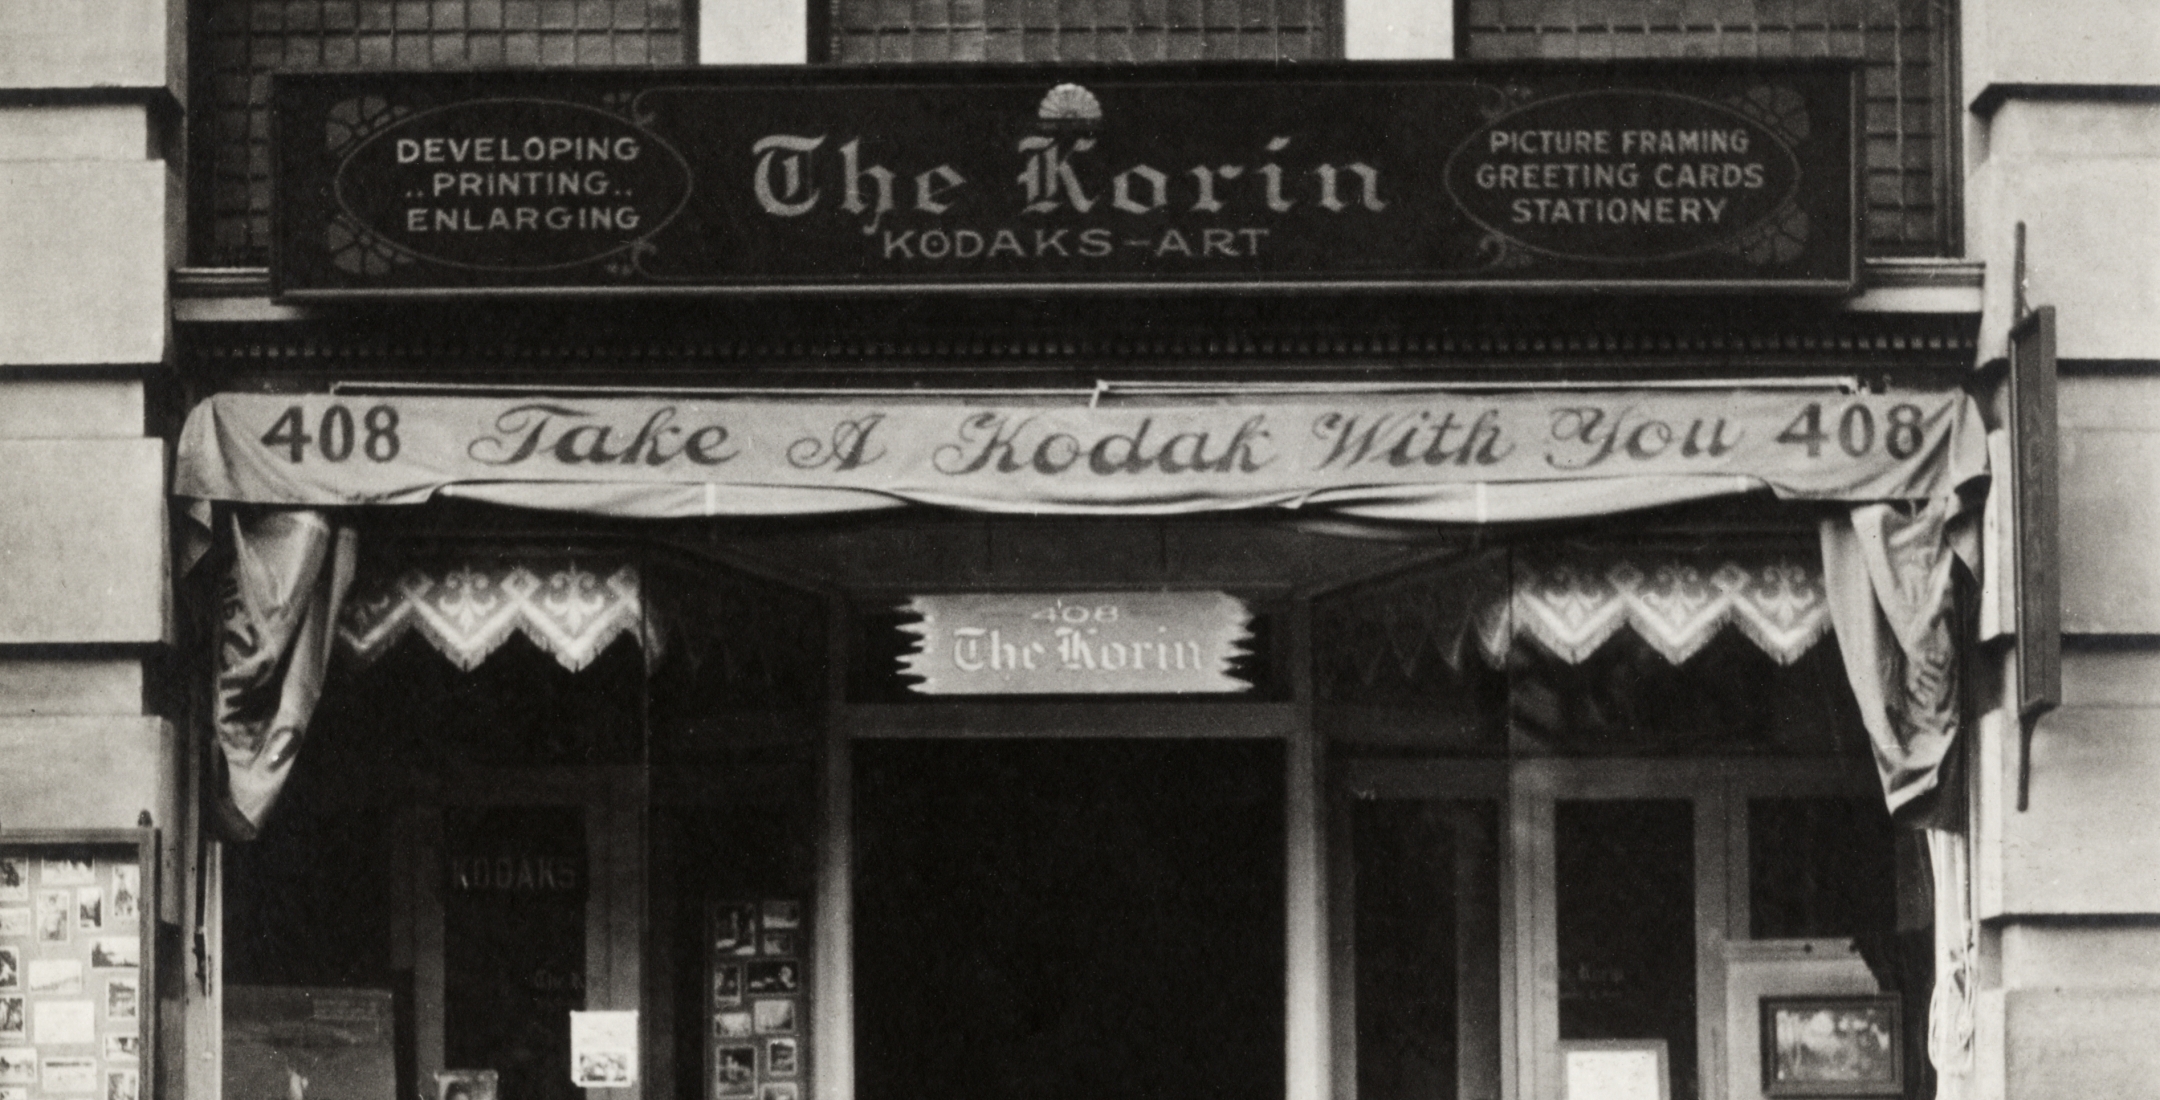 Black and white image of an early 20th century storefront. Signs read: "The Koran KODAKS—ART" and "Take a Kodak with You".